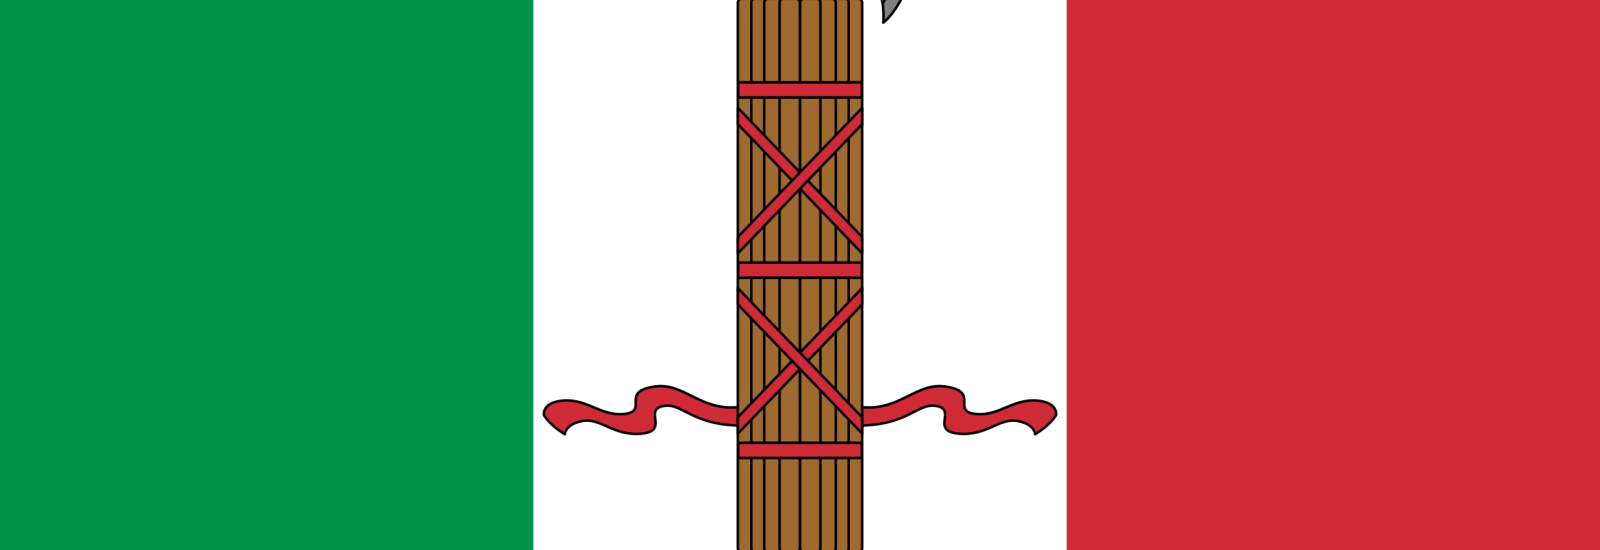 The Italian flag, combined centrally with the Fascia of Fascism 